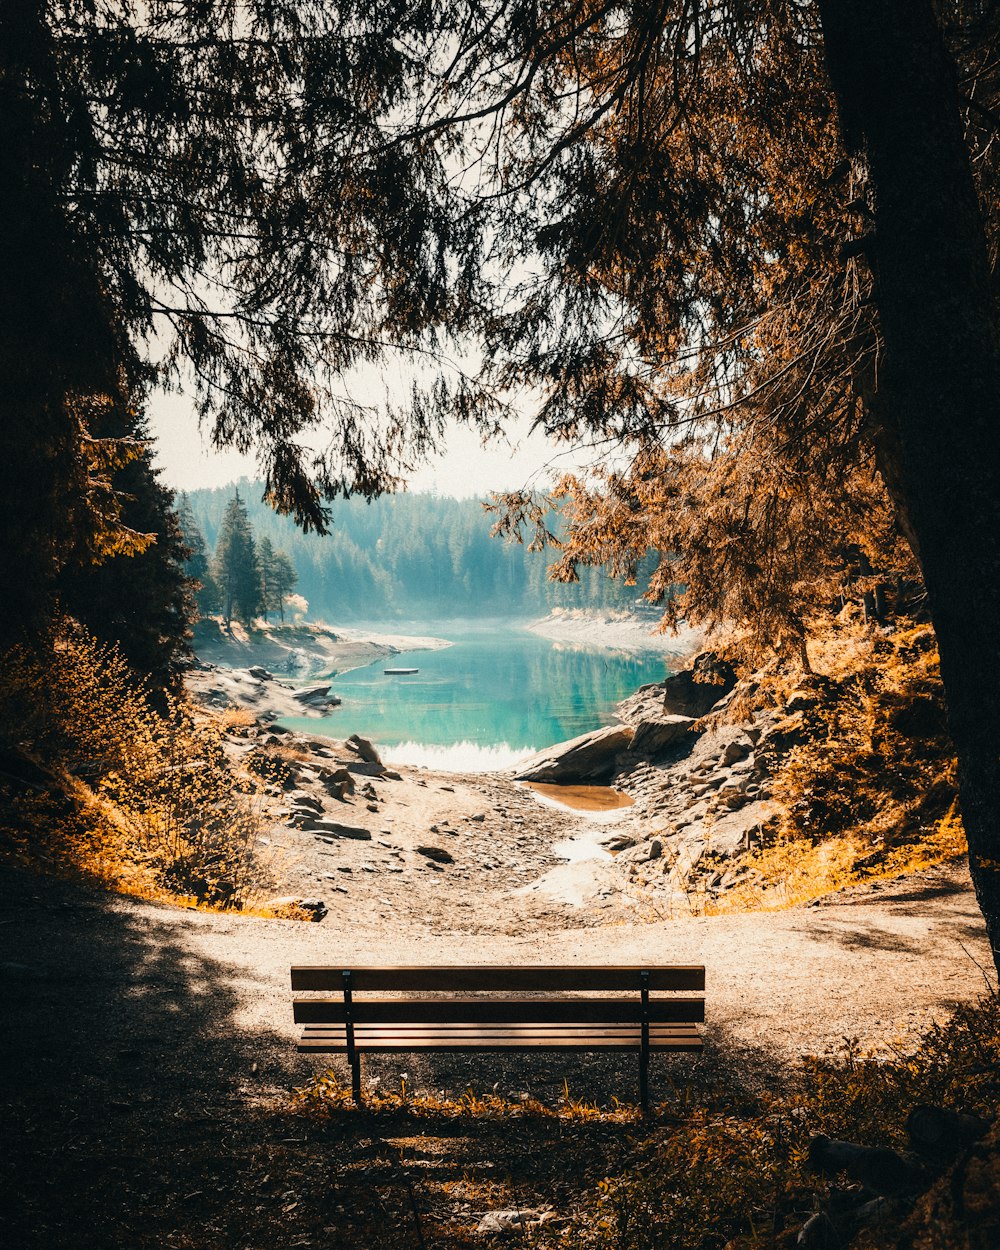 a bench sits unoccupied